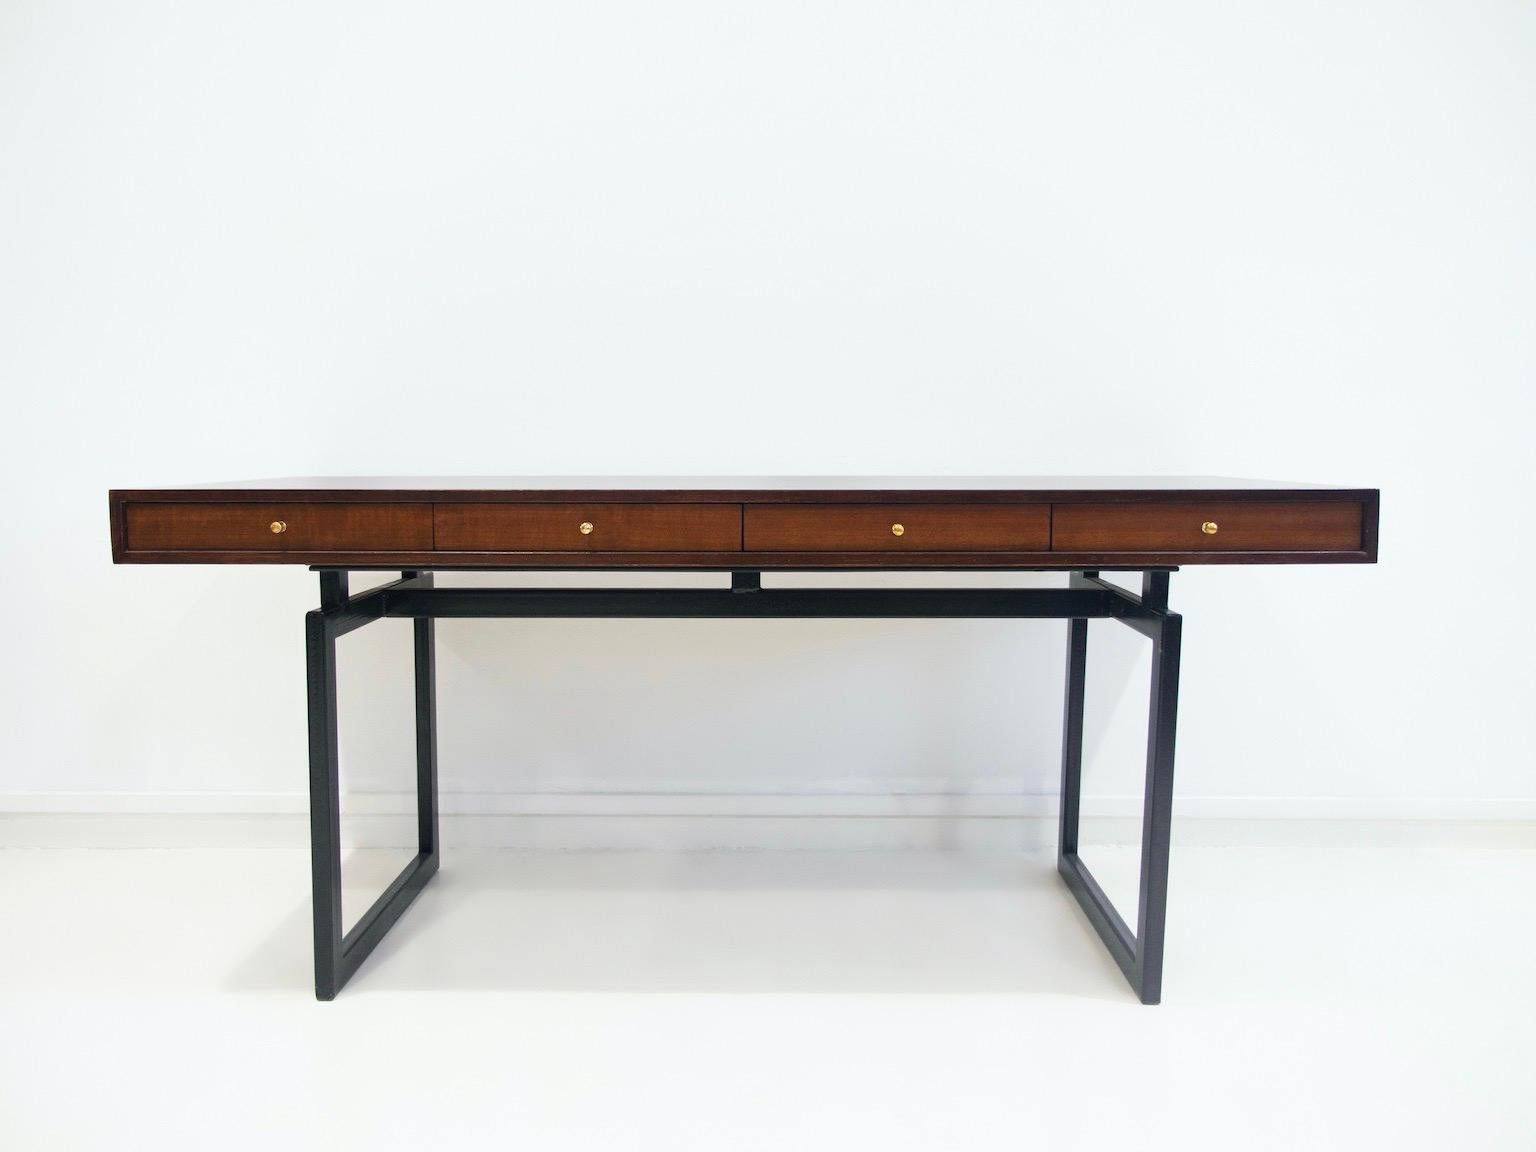 Large desk veneered with dark wood, front with four drawers with gold-colored pulls. Legs of black lacquered metal. 